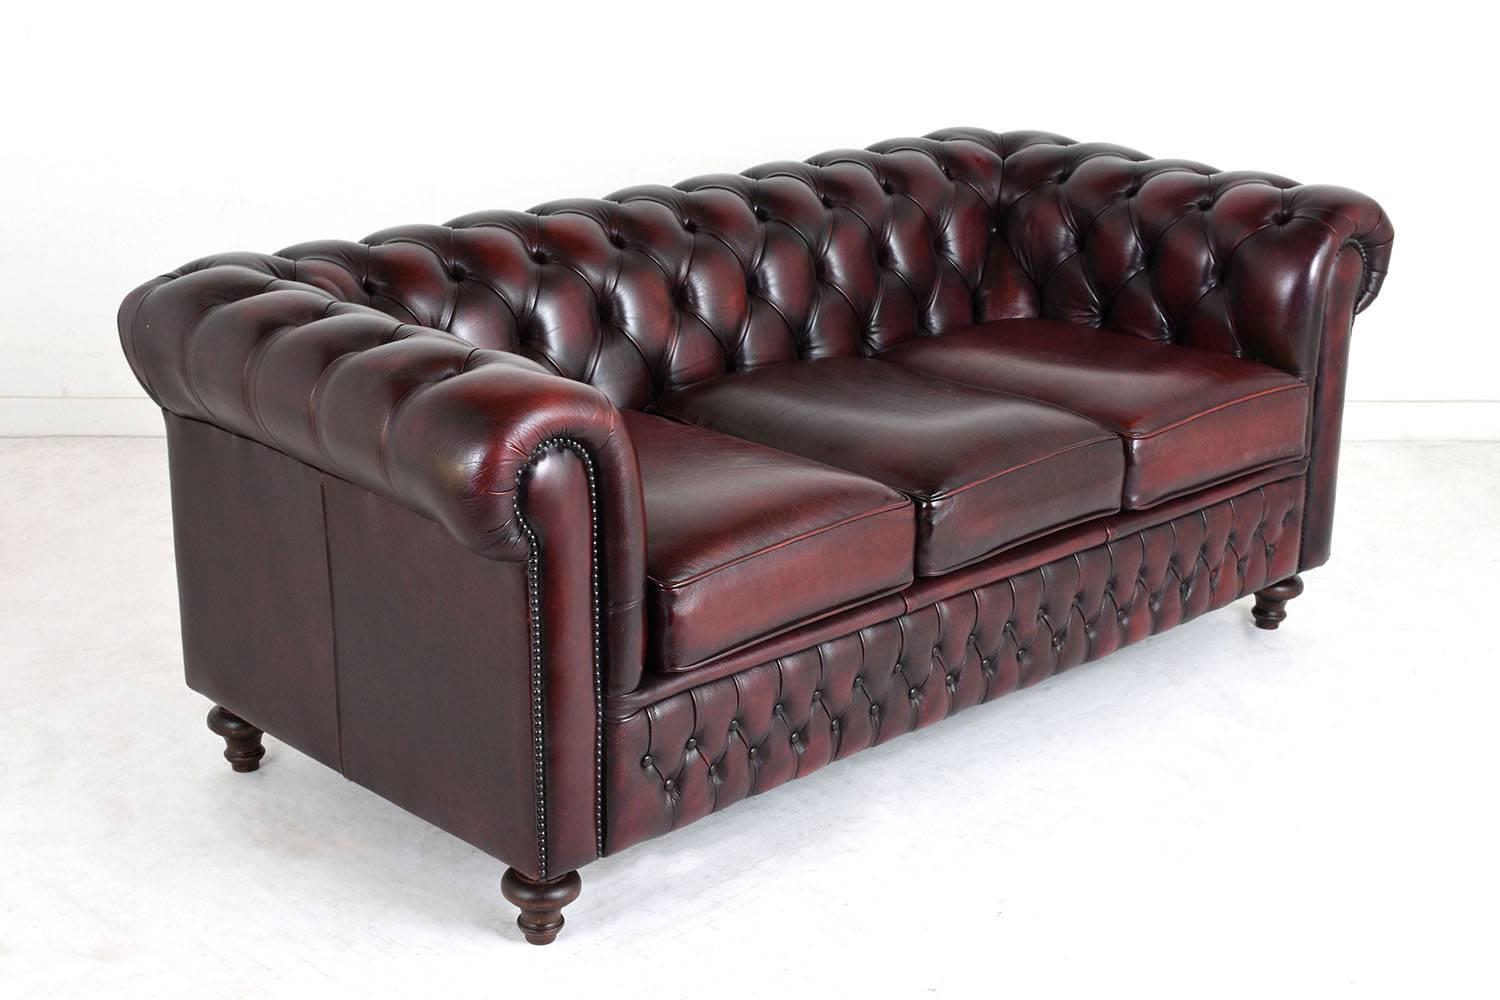 Carved Vintage Chesterfield-Style Tufted Leather Sofa